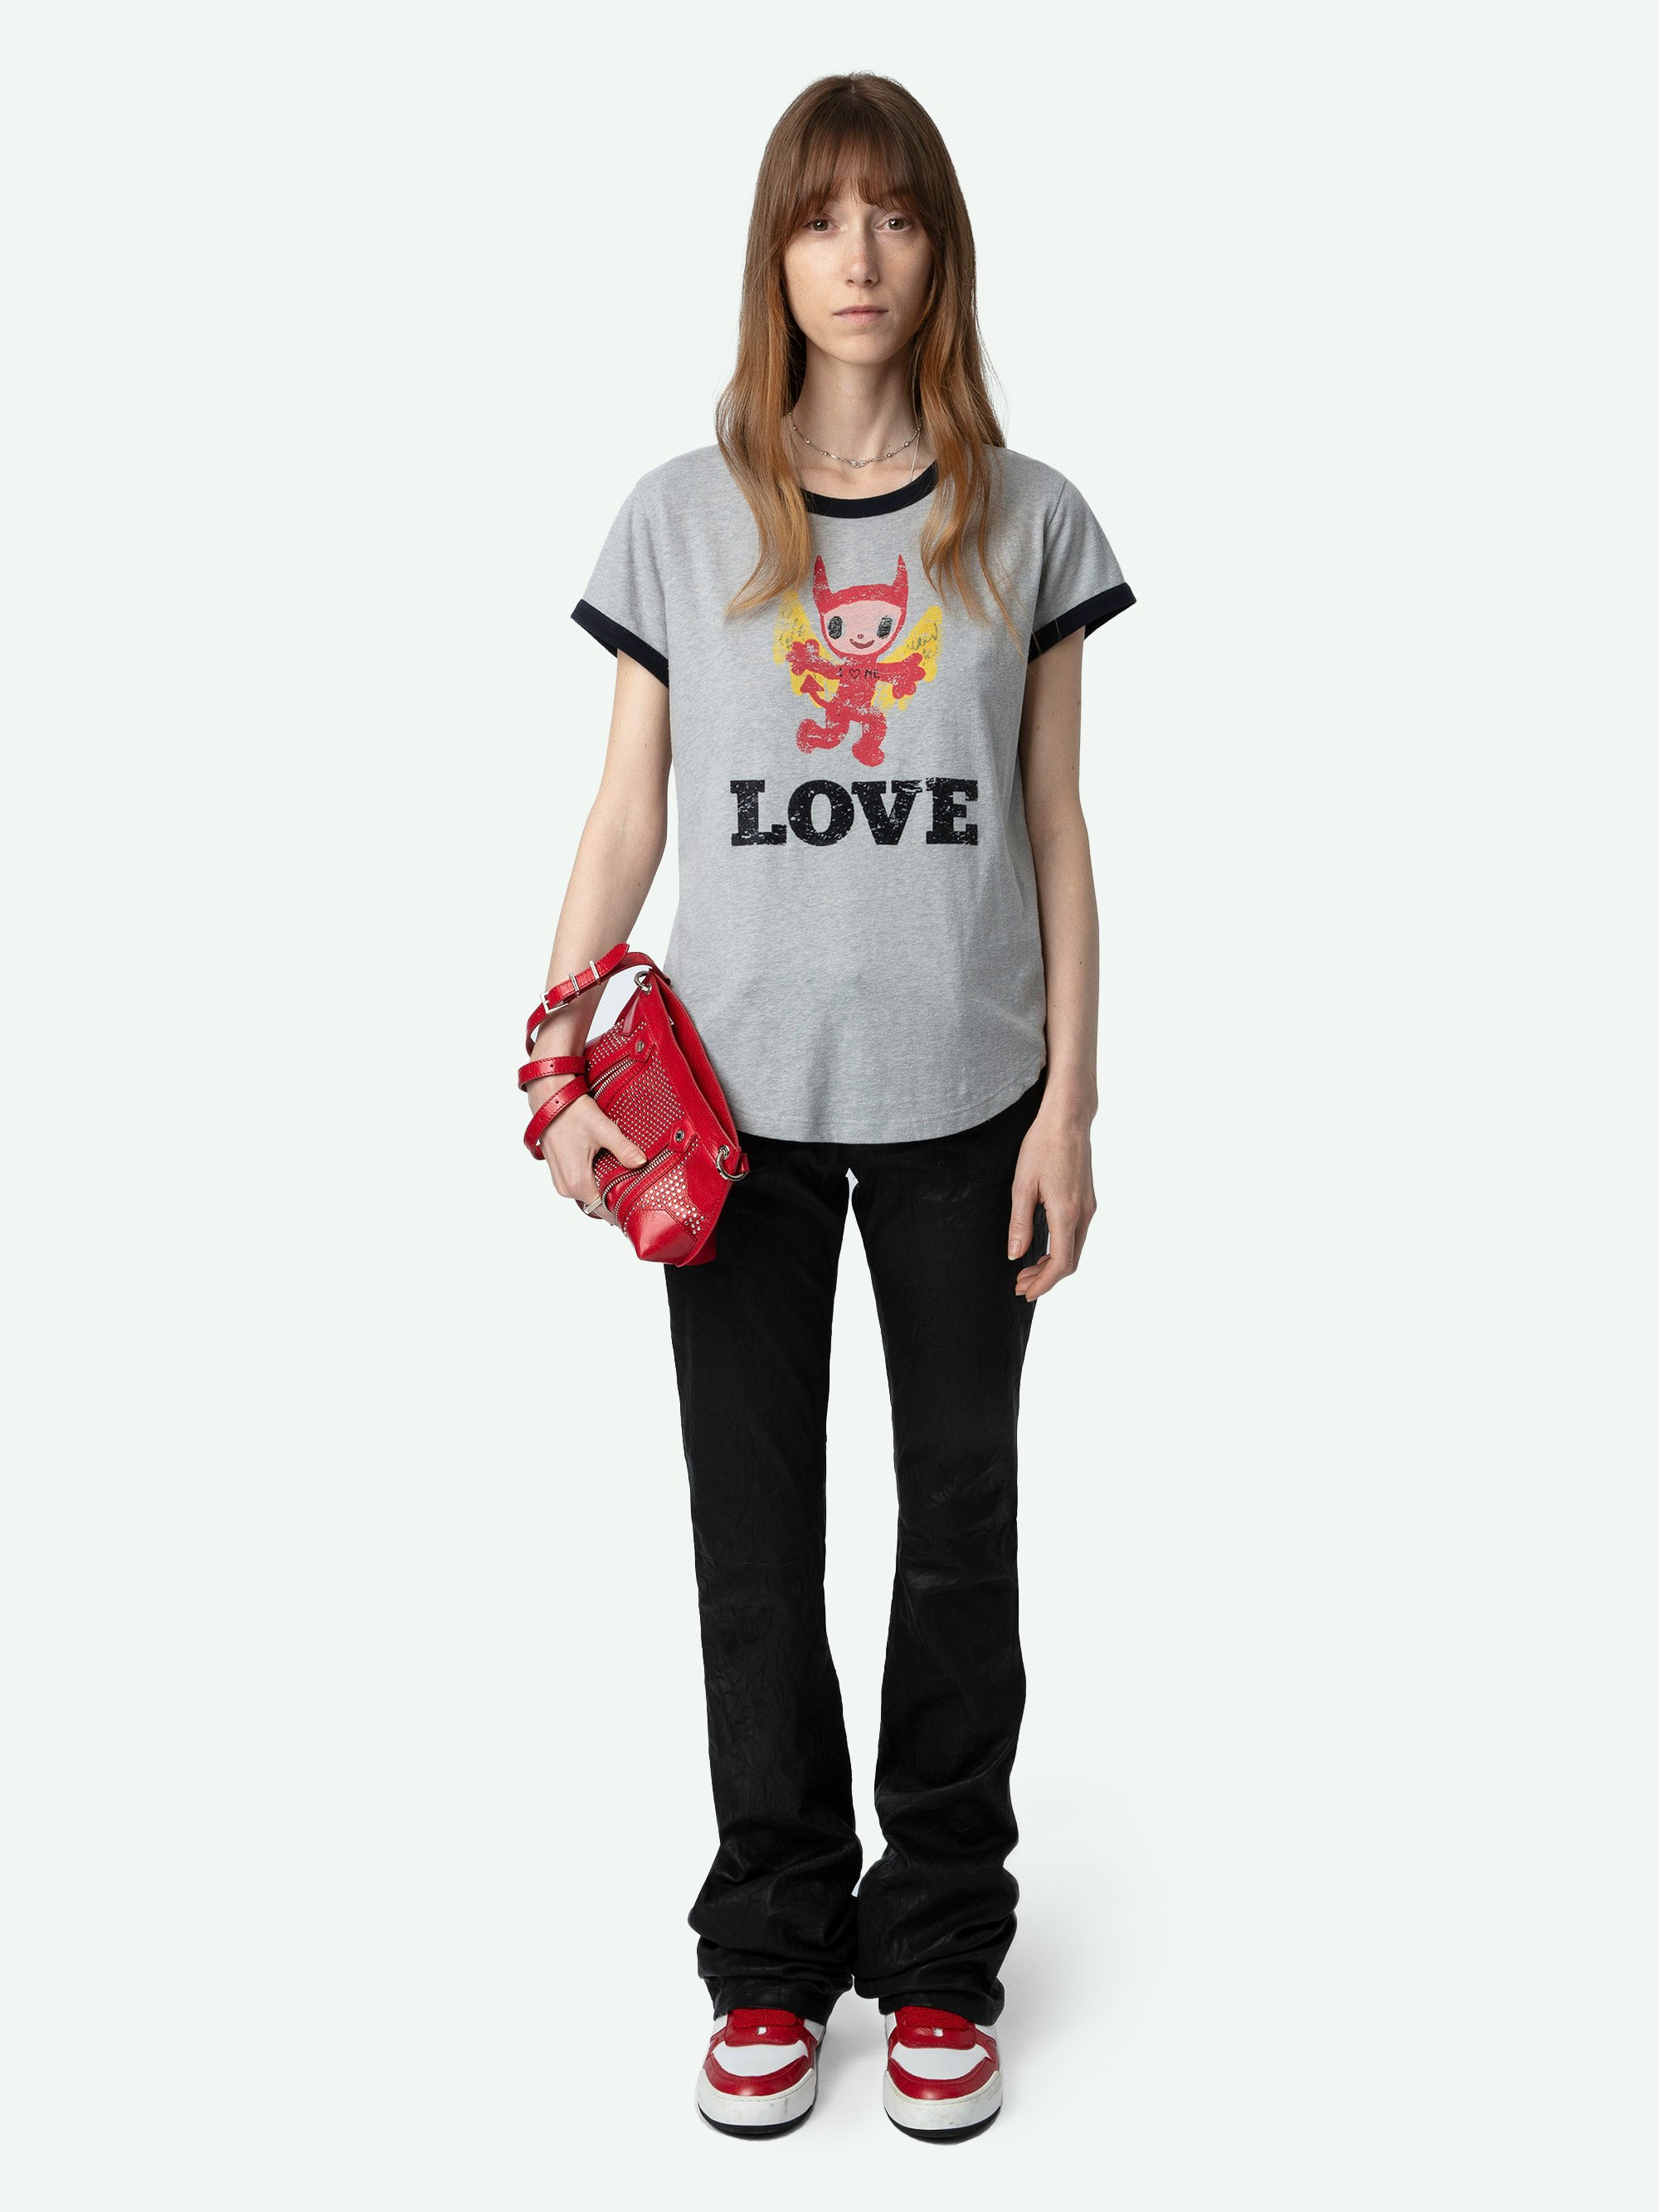 Woop Devil T-shirt - Short-sleeved mottled grey T-shirt with contrasting edges and Devil Love print on the front.